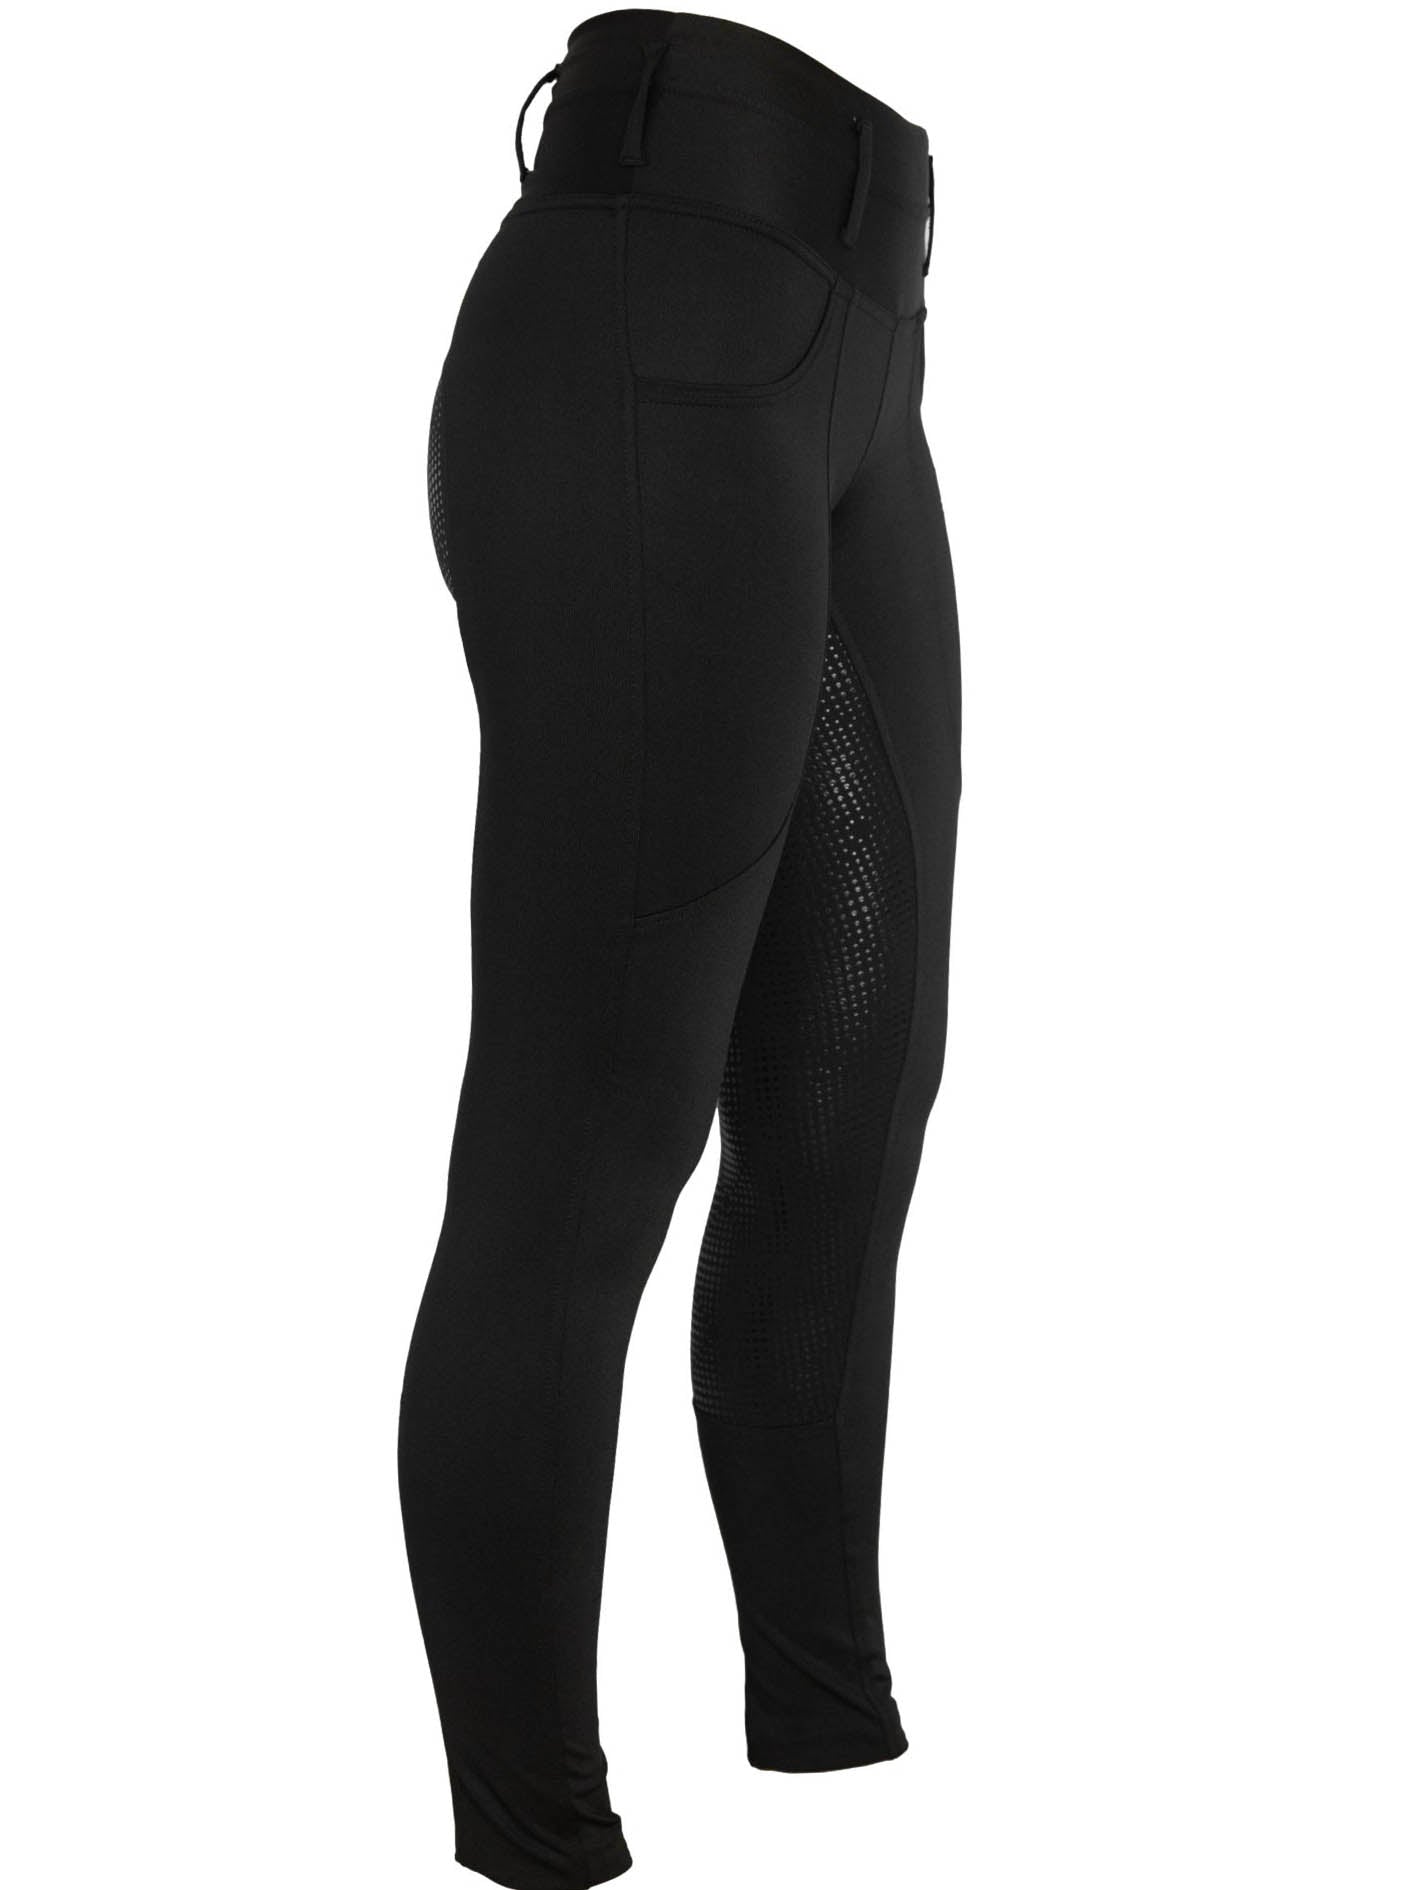 Alice horse riding tights in black - Plum Tack